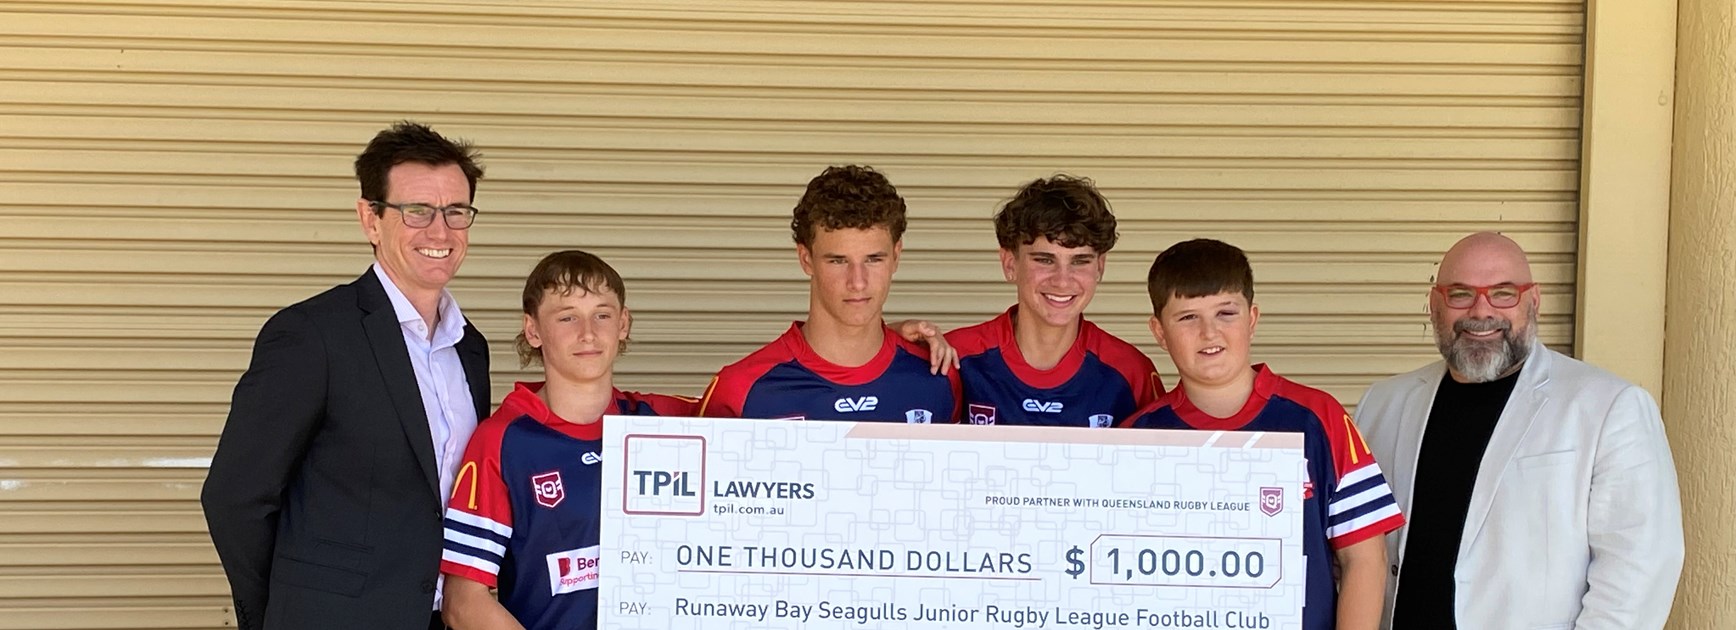 Ikin and TPIL Lawyers back Gold Coast juniors